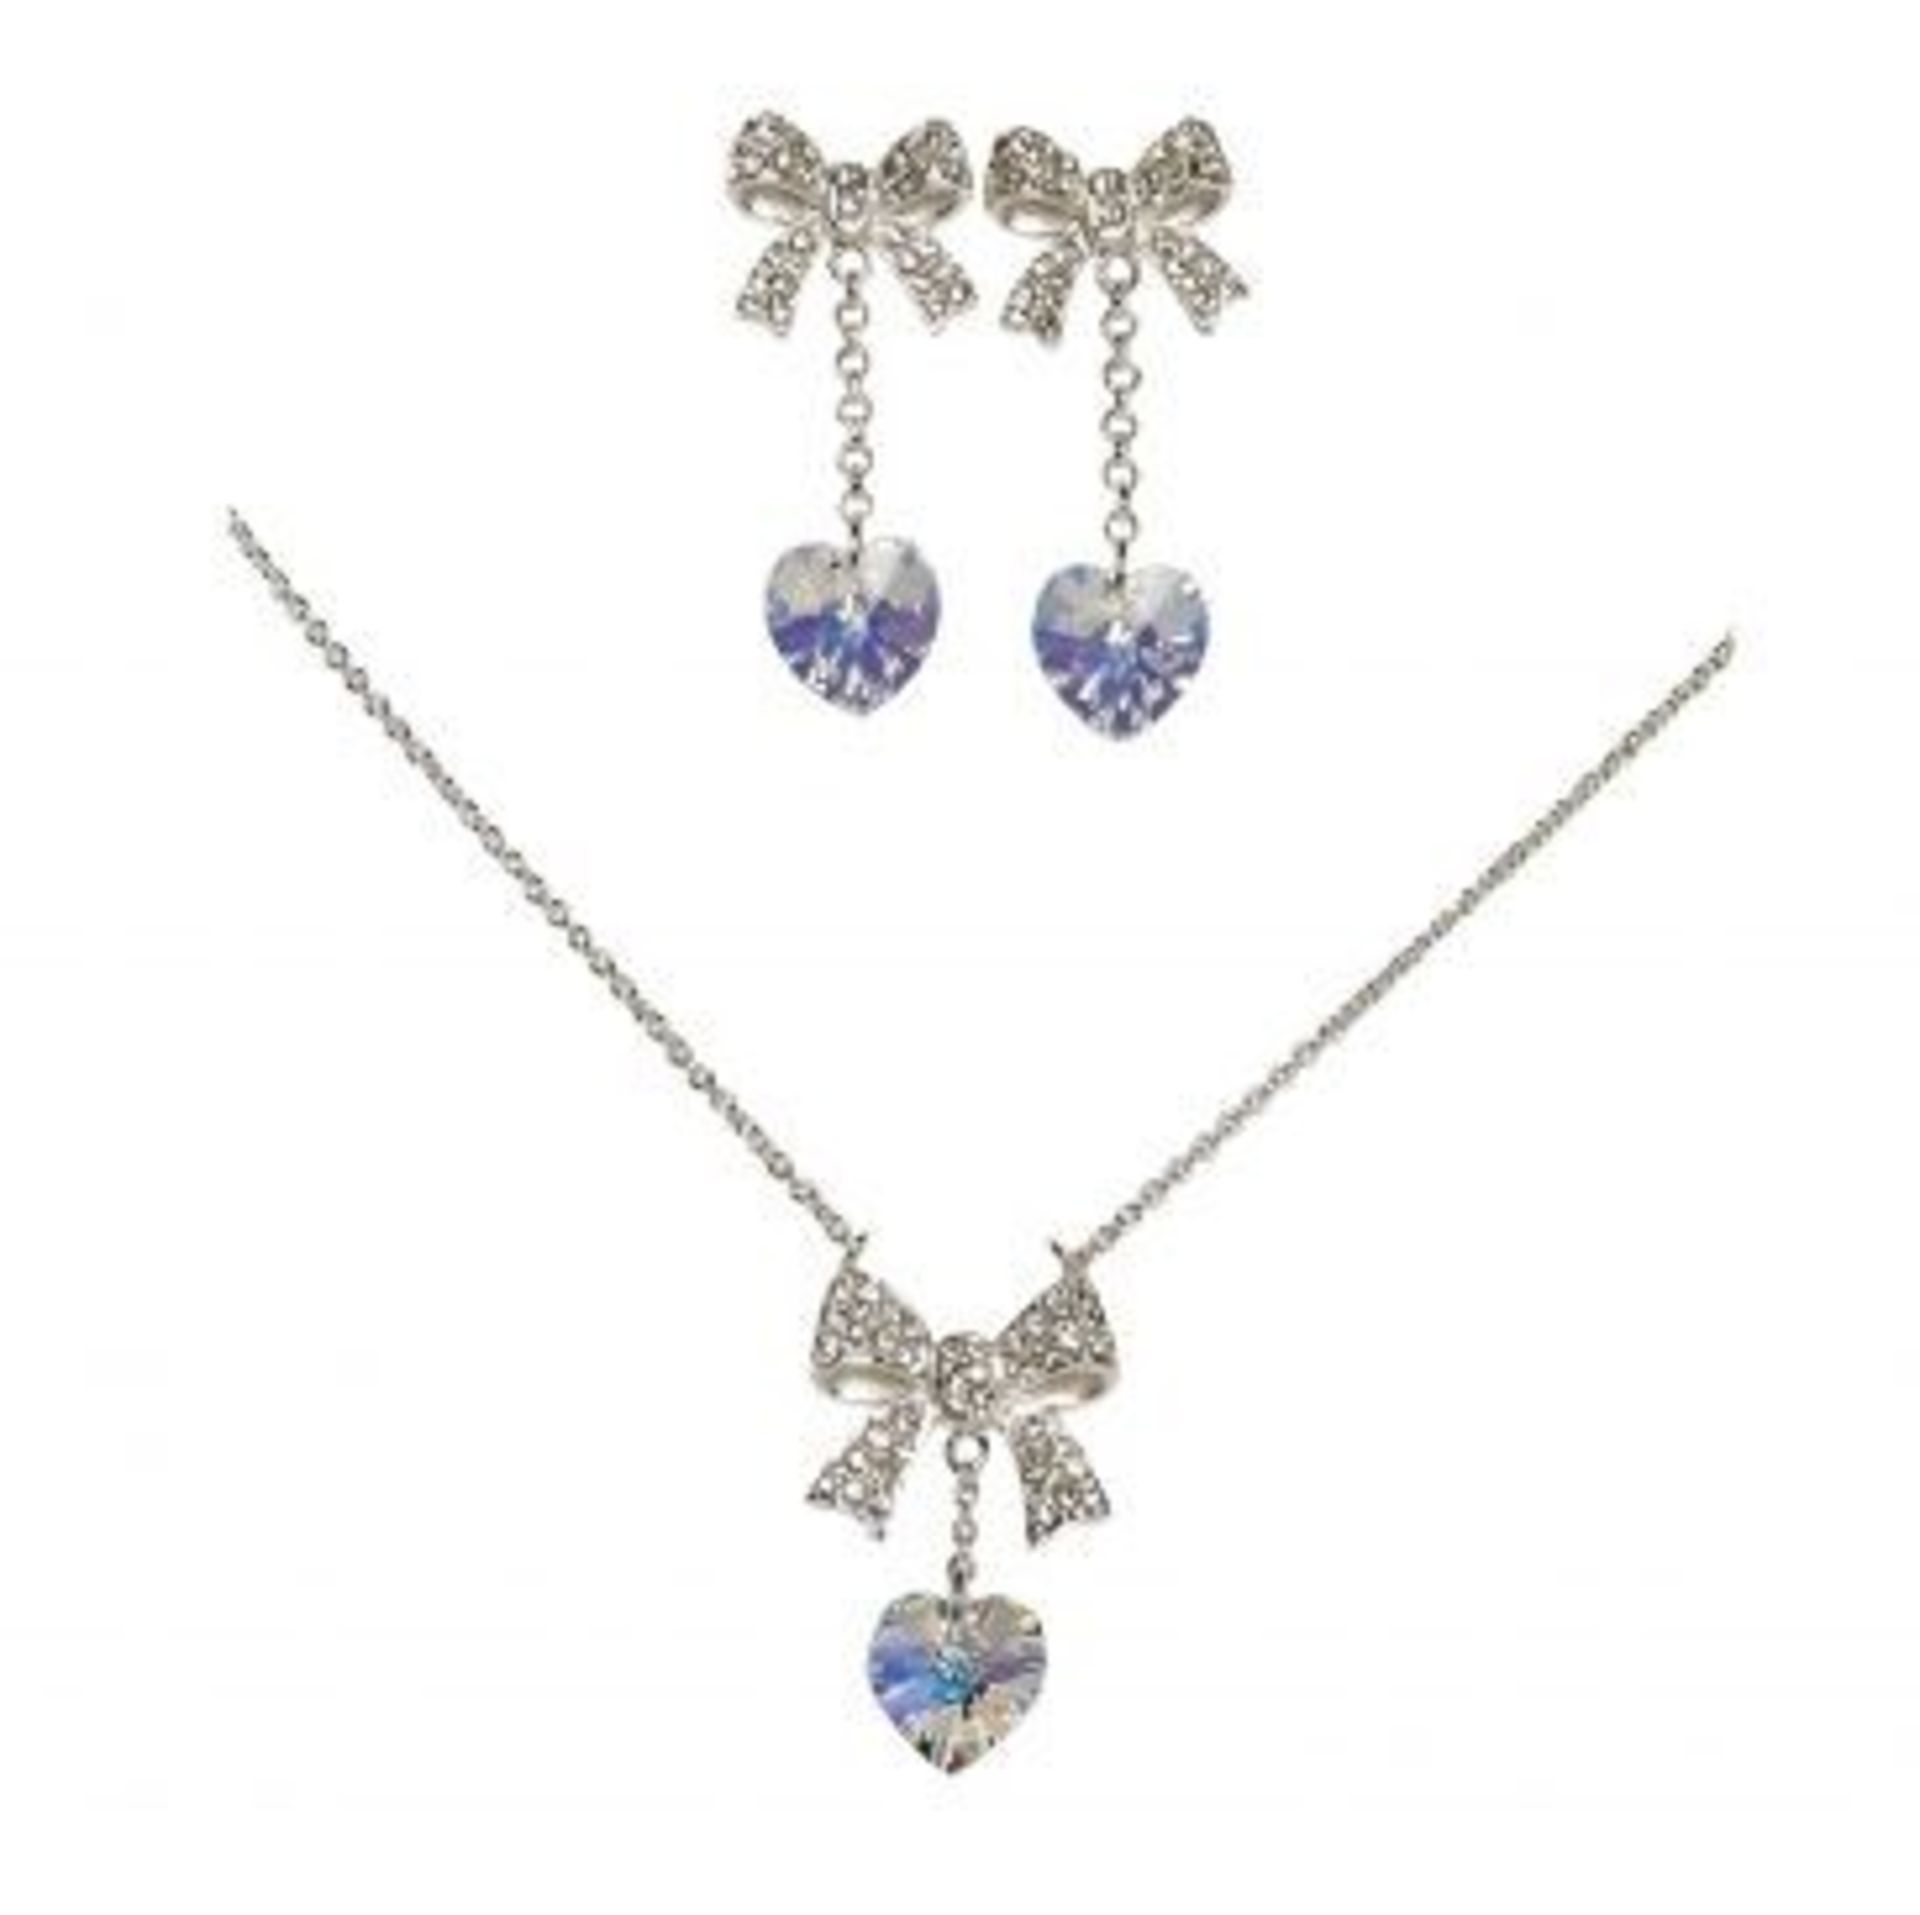 10 x HEART PENDANT AND EARRING SETS By ICE London - EGJ-9900 - Silver-tone Curb Chain Adorned With - Bild 2 aus 2